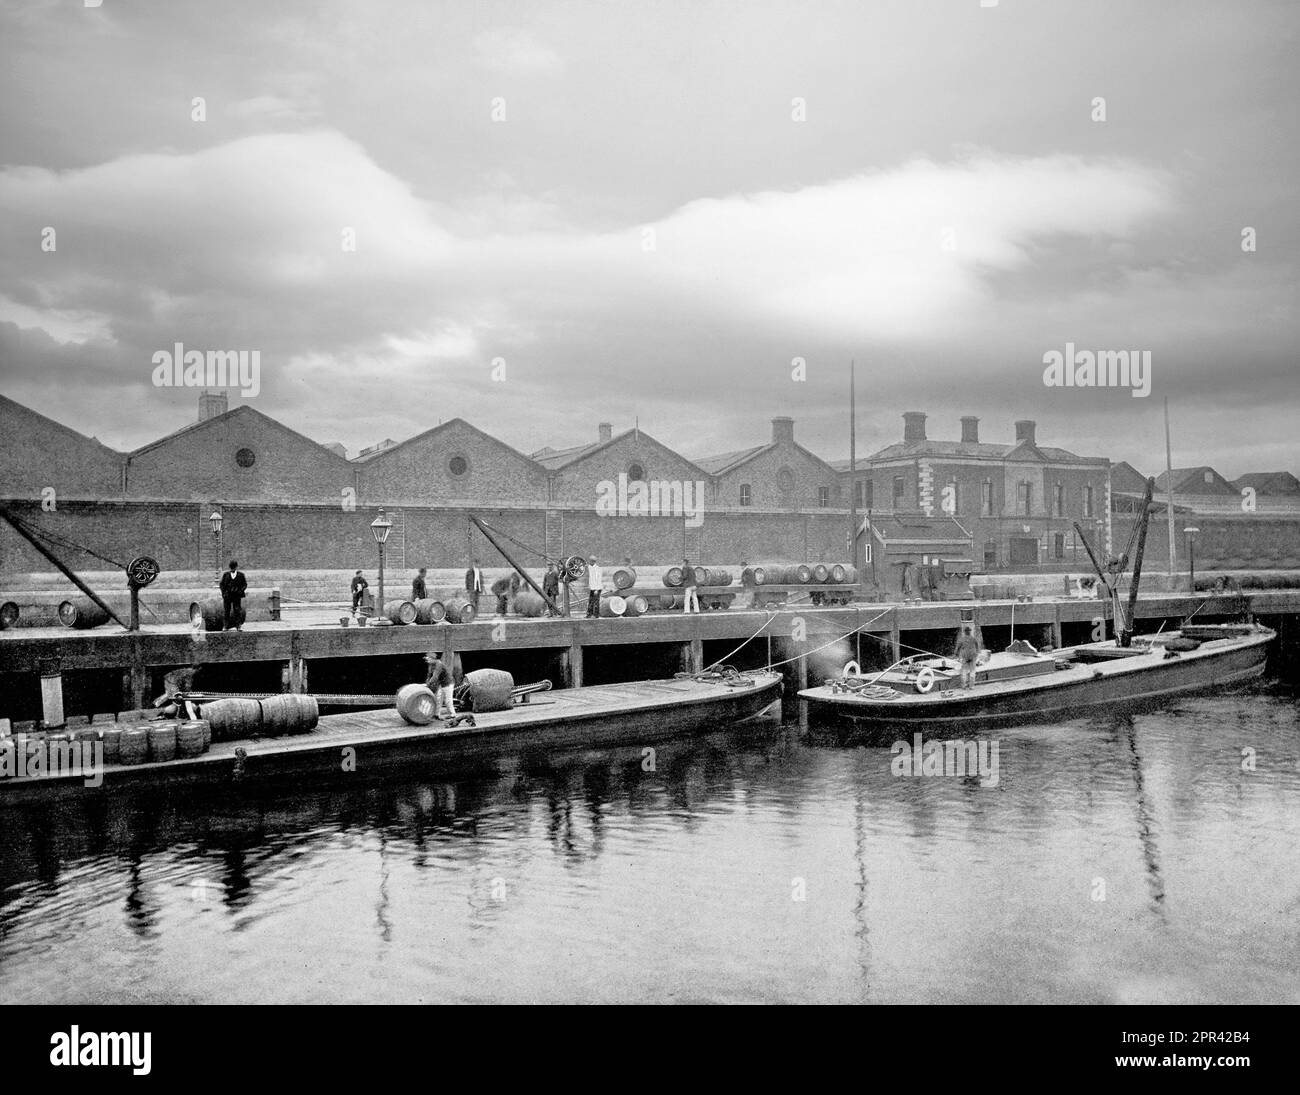 An late 19th century view of workmen loading Guinness Barrels onto barges moored to the quays on the River Liffey, Dublin, Ireland. When St. James's Gate land was leased to Arthur Guinness at £45 per year for 9,000 years, the brewery founded in 1759 has been the home of Guinness ever since. It became the largest brewery in Ireland in 1838, and the largest in the world by 1886, with an annual output of 1.2 million barrels. Stock Photo